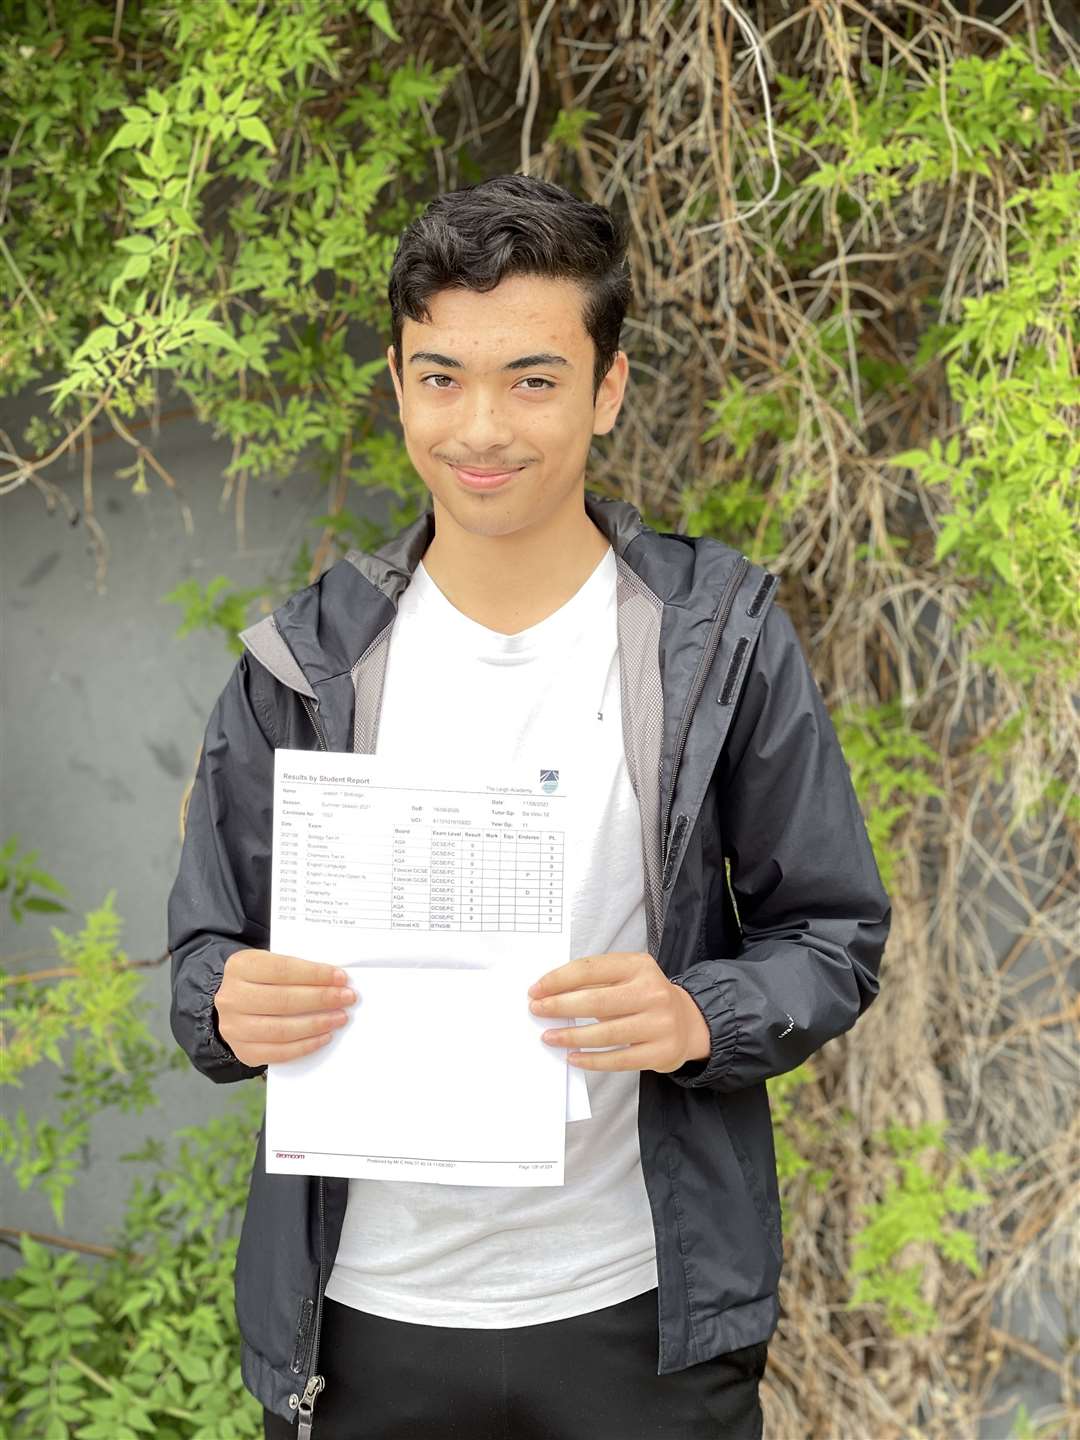 Leigh Academy pupil Joseph got grade 9 in maths, biology, physics, chemistry and business studies, 8 in French and geography, 7 in English language and Distinction* in Performing Arts Acting